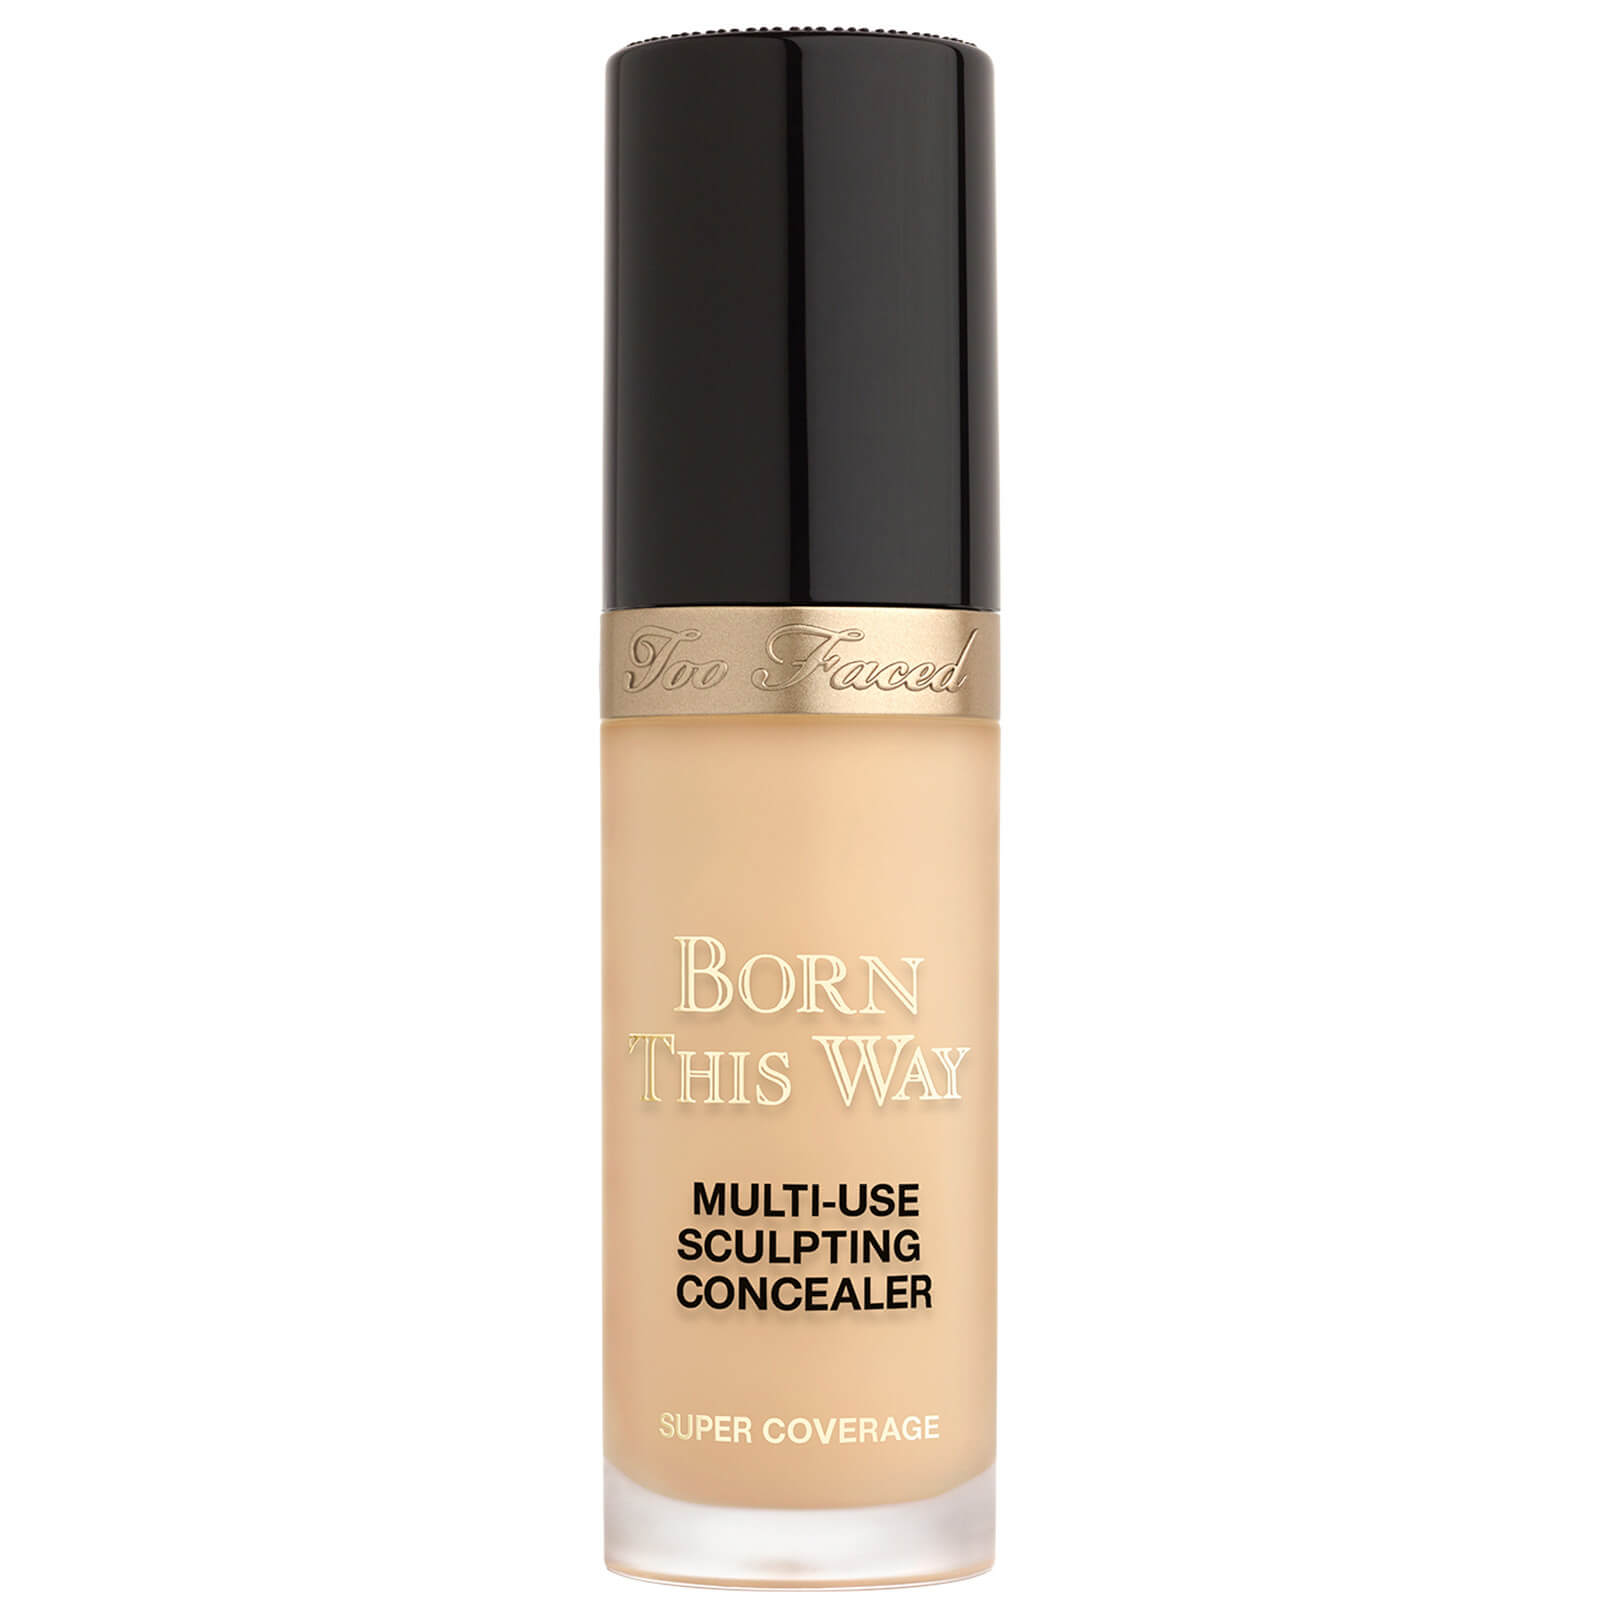 Too Faced Born This Way Super Coverage Multi-Use Concealer 13.5ml (Various Shades) - Shortbread